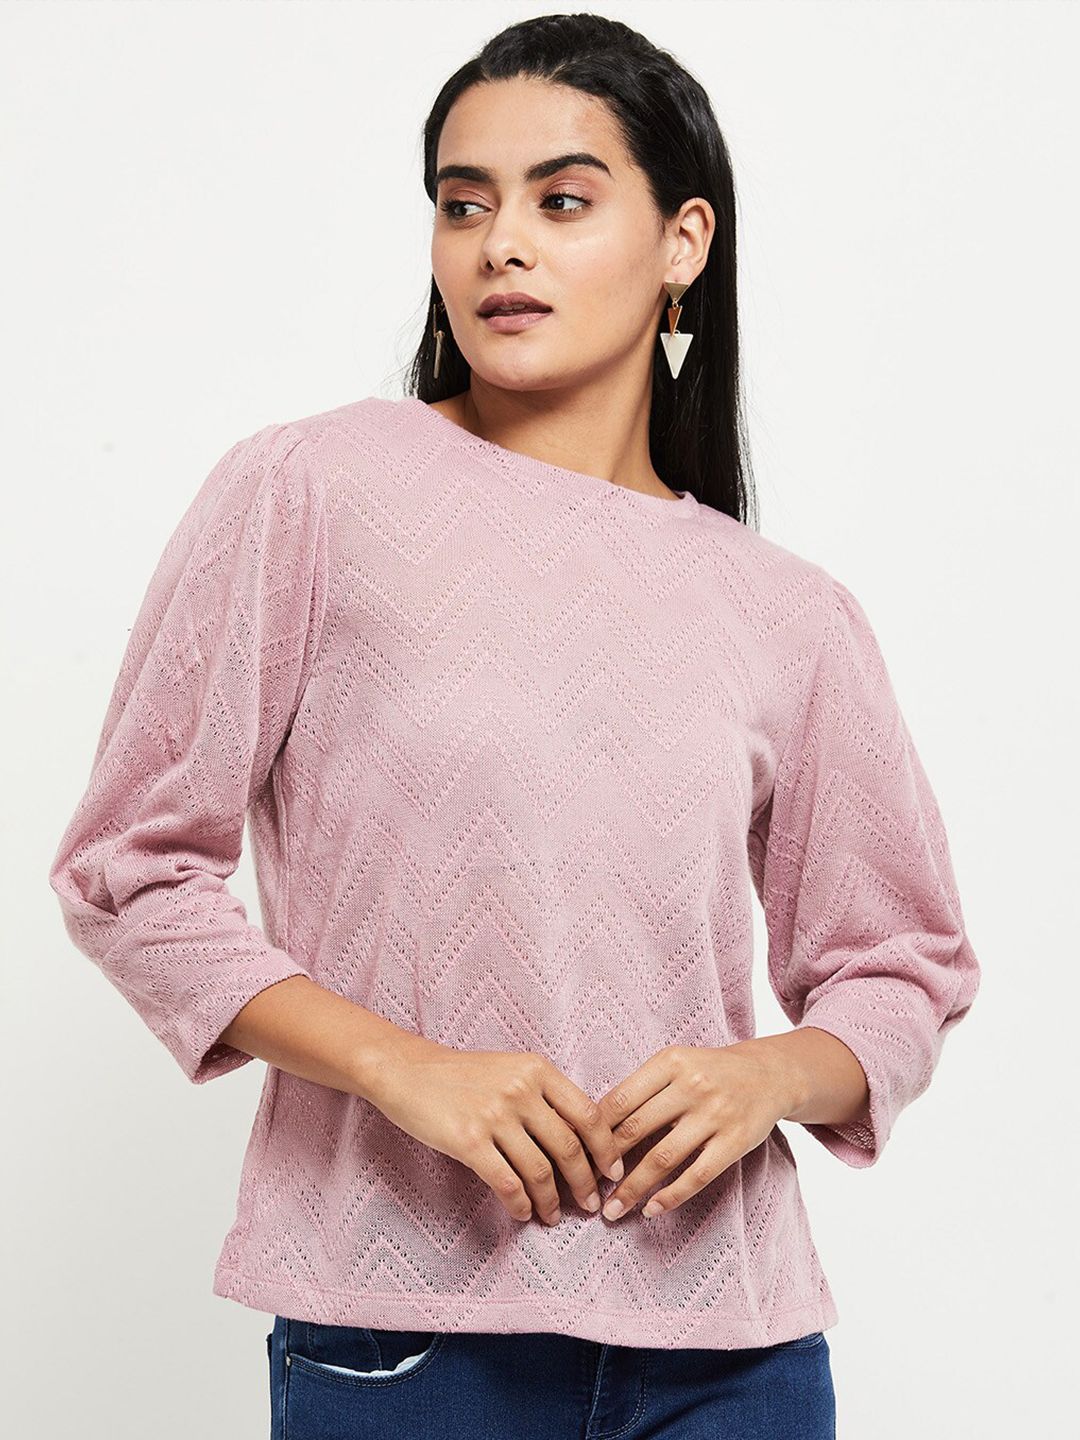 max Pink Top Price in India